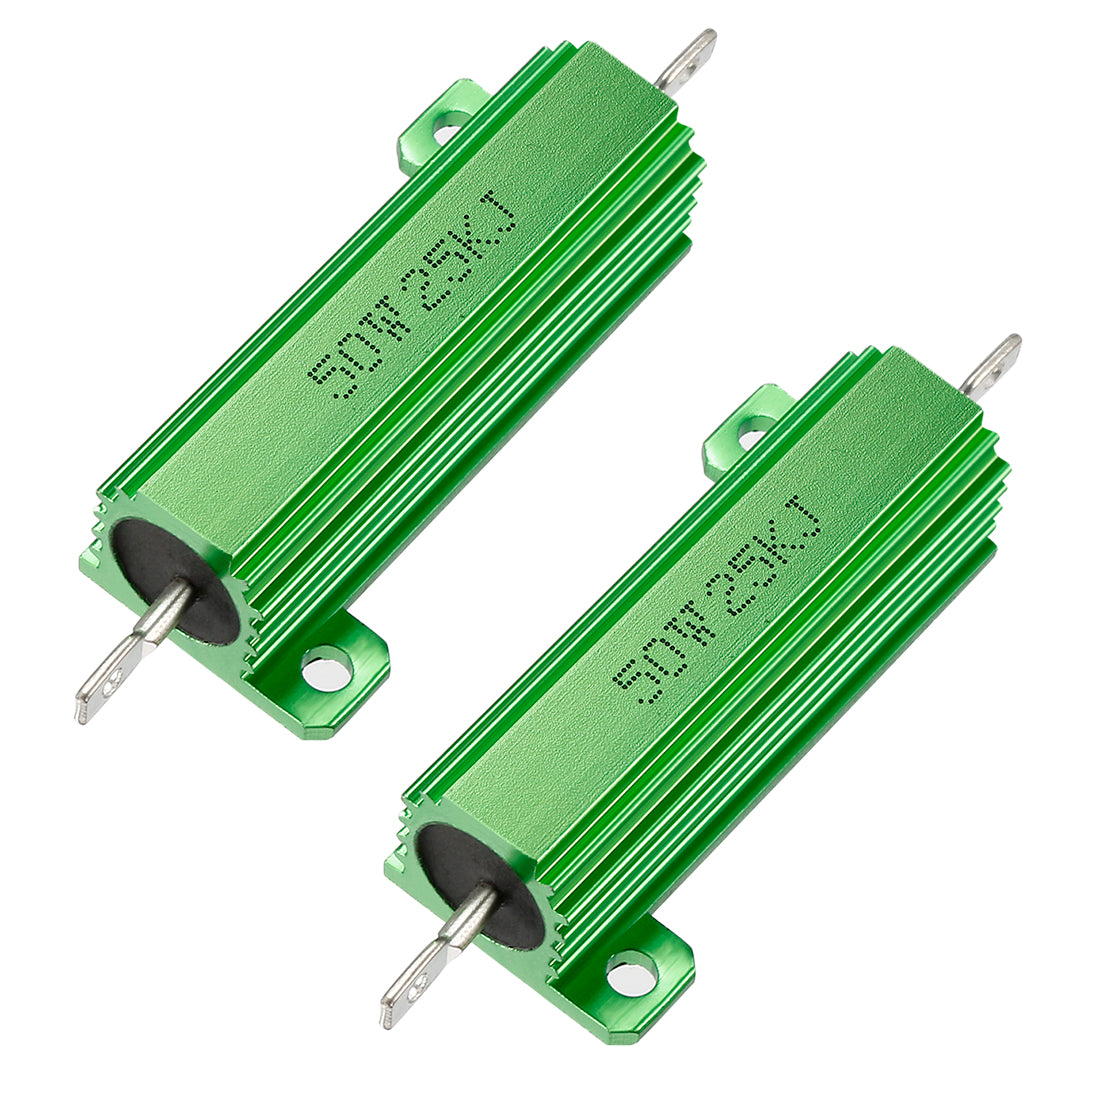 uxcell Uxcell 50W 25k Ohm 5% Aluminum Housing Resistor Screw  Chassis Mounted Aluminum Case Wirewound Resistor Load Resistors Green 2 pcs